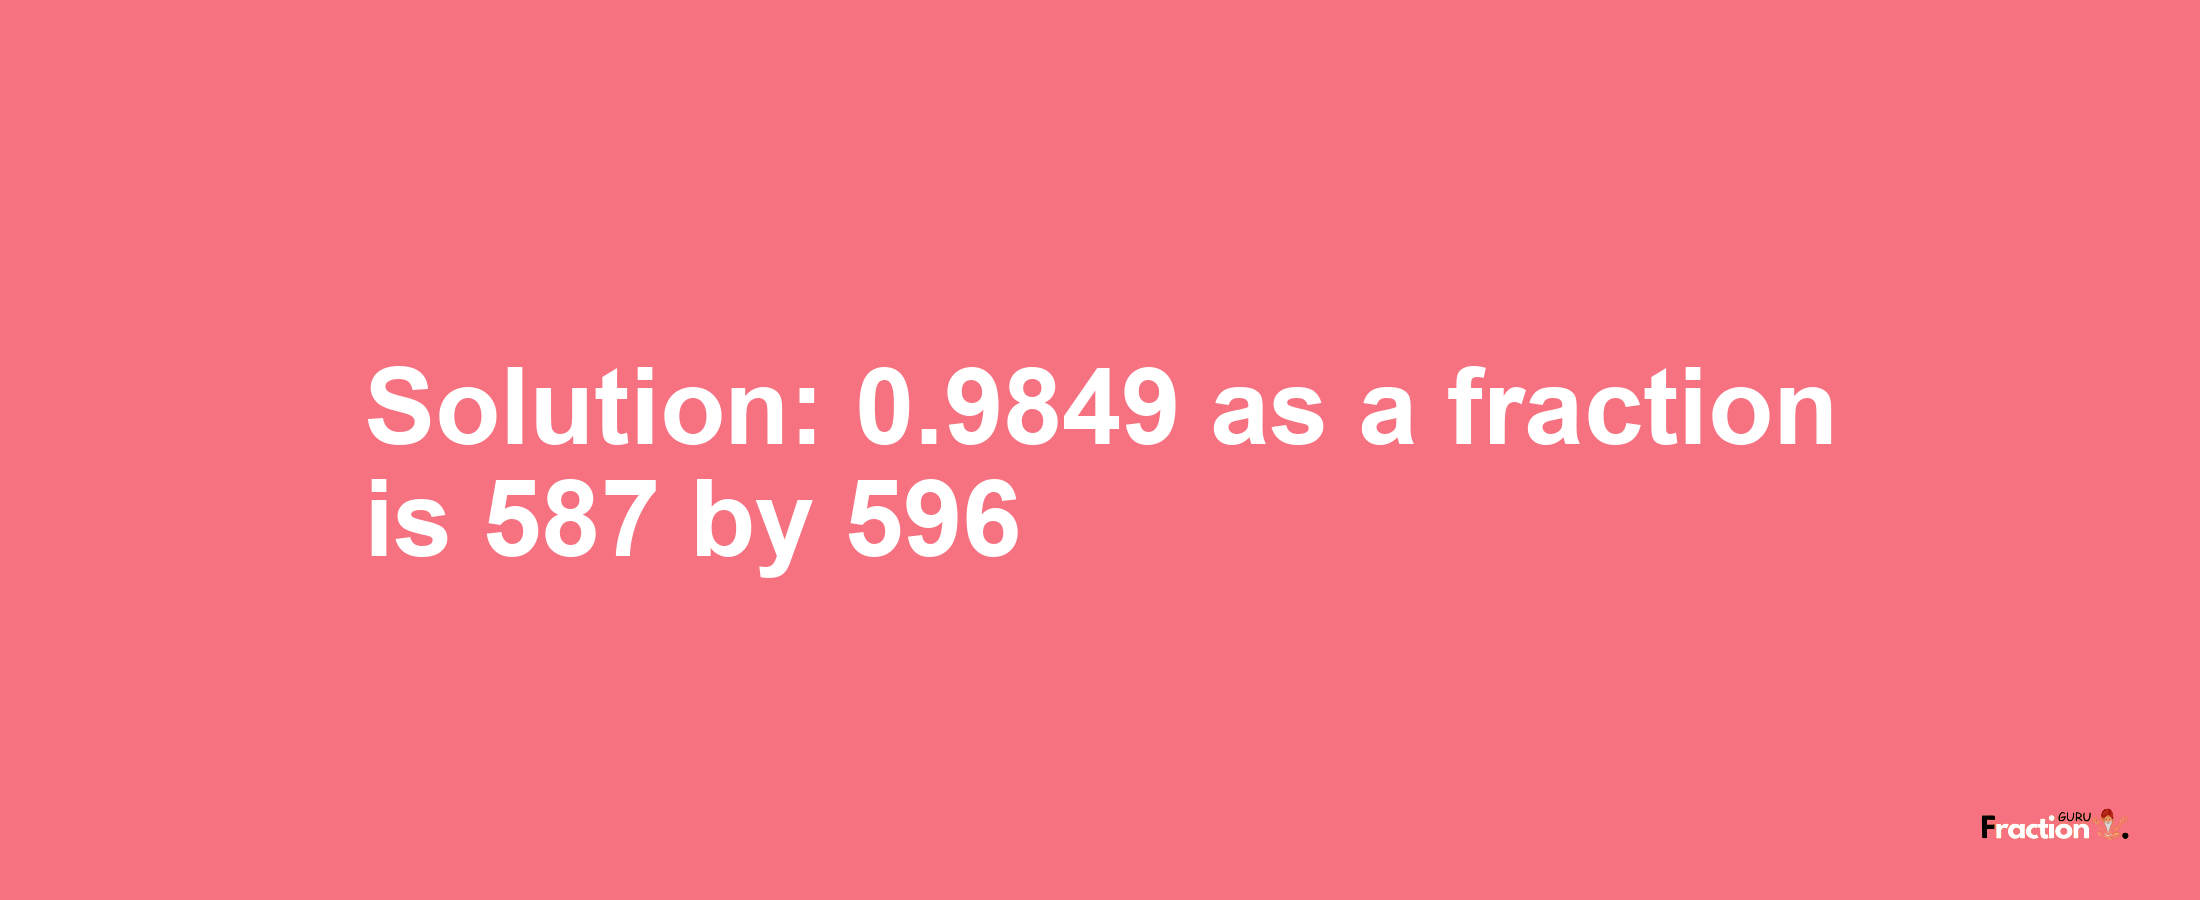 Solution:0.9849 as a fraction is 587/596